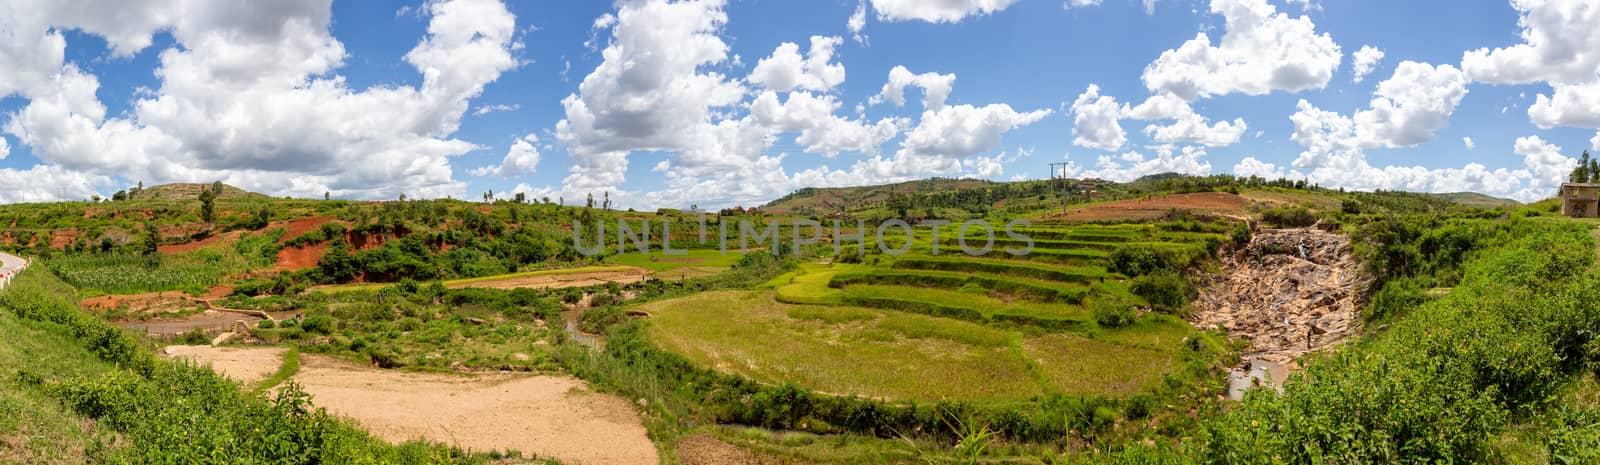 Panoramic shots of landscape images on the island of Madagascar by 25ehaag6